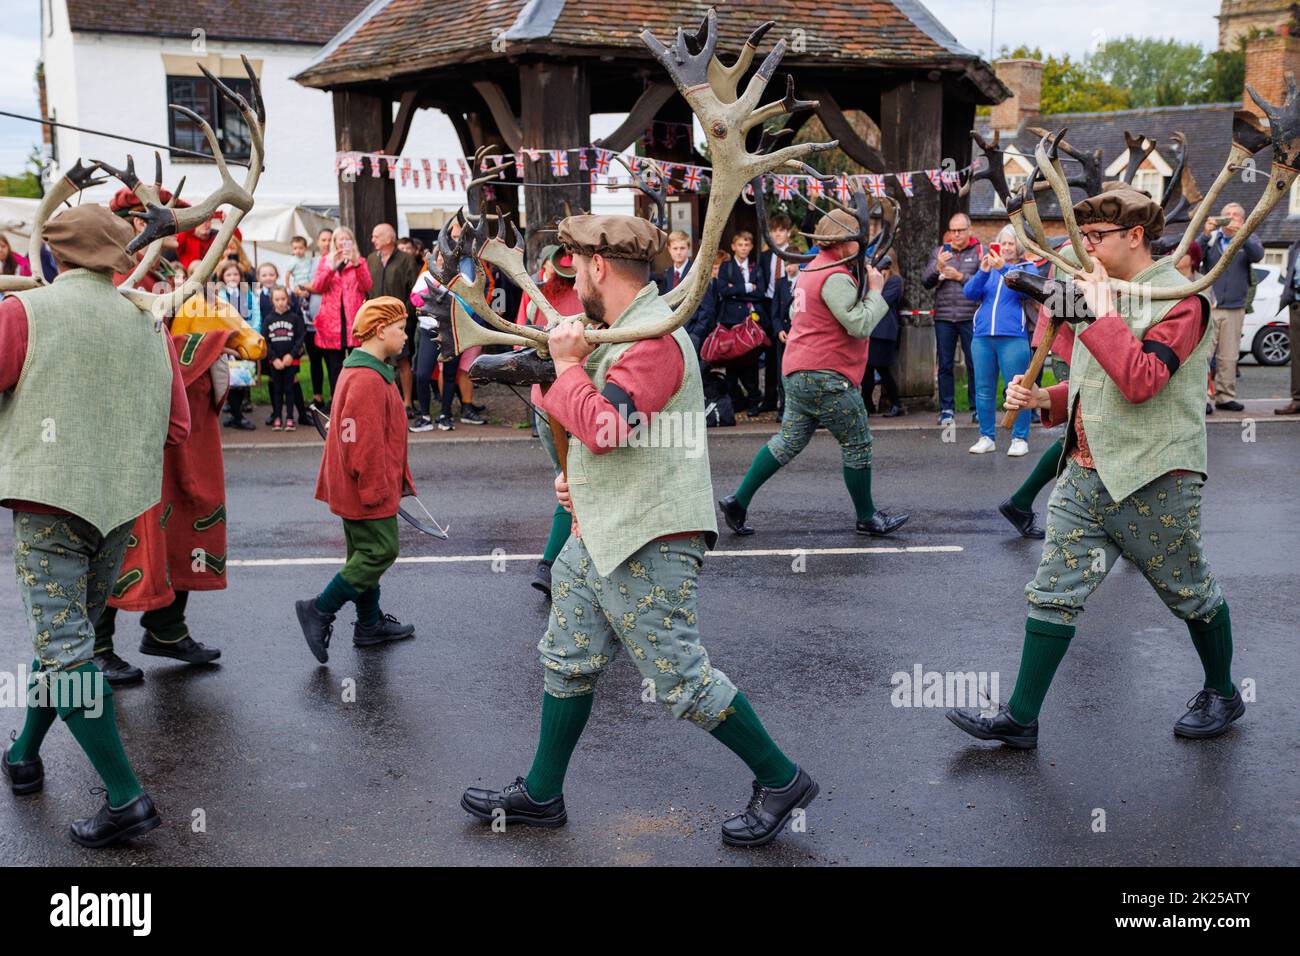 The Annual Abbotts Bromley Horn Dance. Pictured, the deer-men dancing infront of the market place in Abbotts Bromley. The folk dancers remove the horns from the walls of St Nicholas Church at 8am and proceed to dance all day visiting nearby villages, returning the horns for another year to the chuch walls at 8pm. A blessing service at 7am takes place led by Revd Simon Davis.in 2022. The horn dance has been taking place since the 12th century. Stock Photo